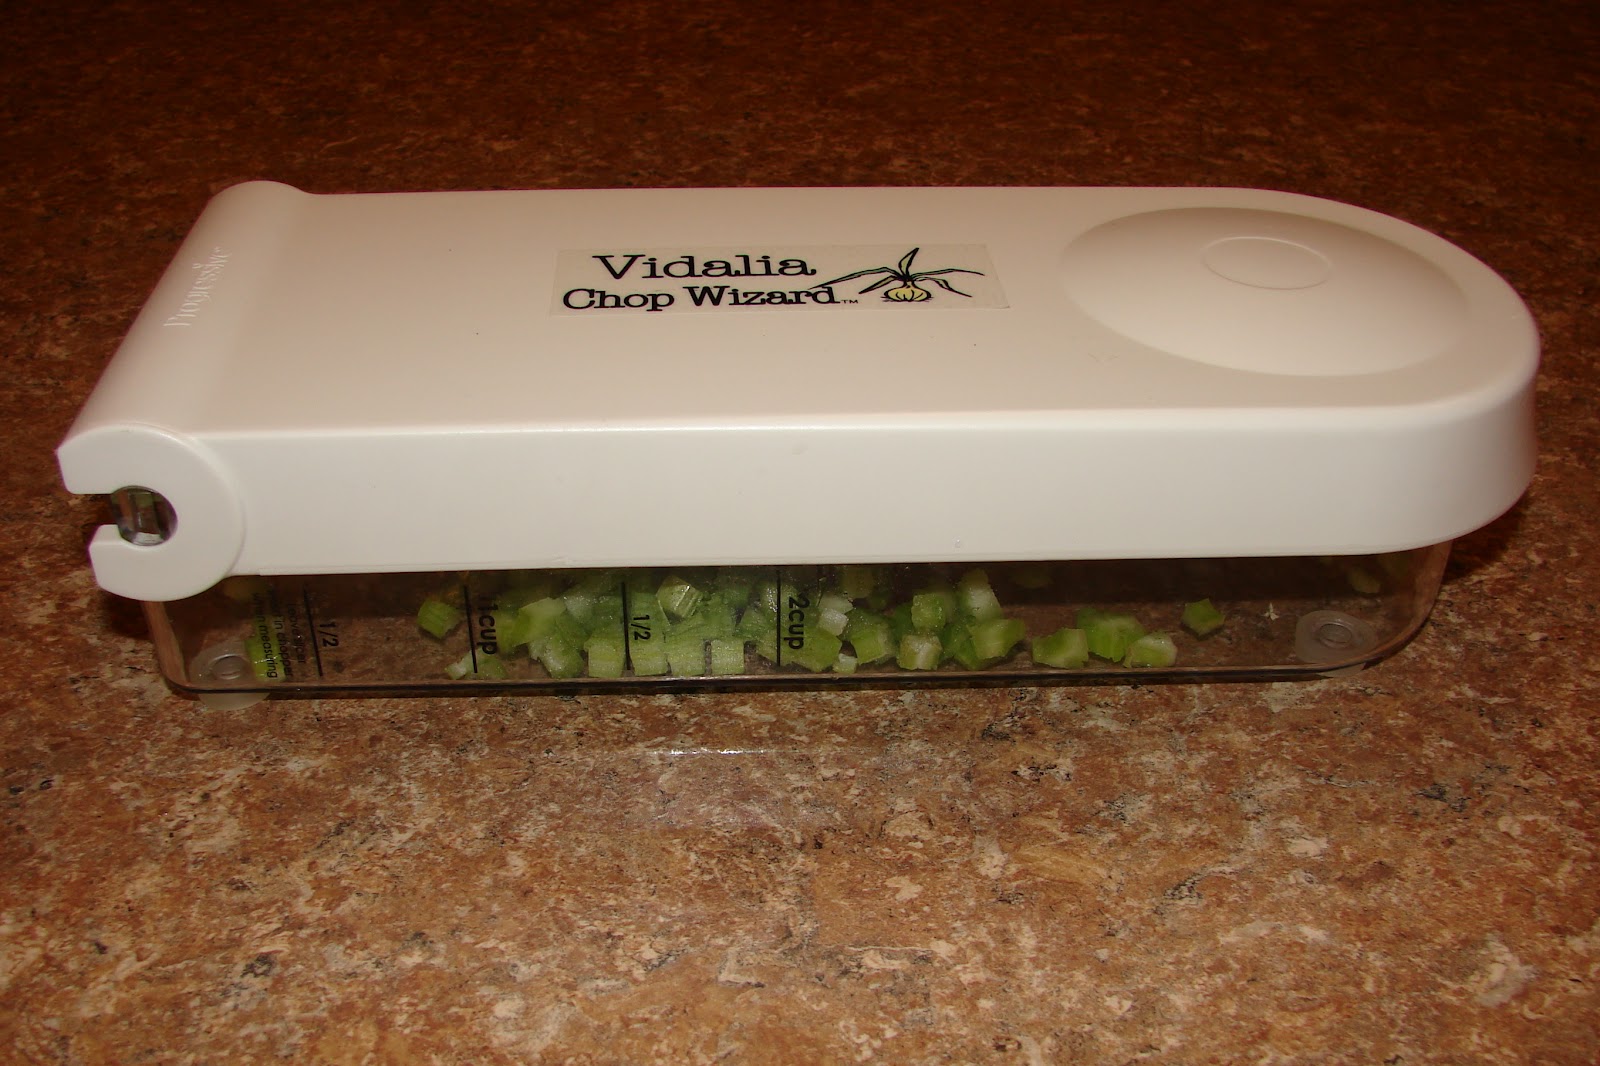 Review of Vidalia Chop Wizard & Freezing My Bell Peppers 